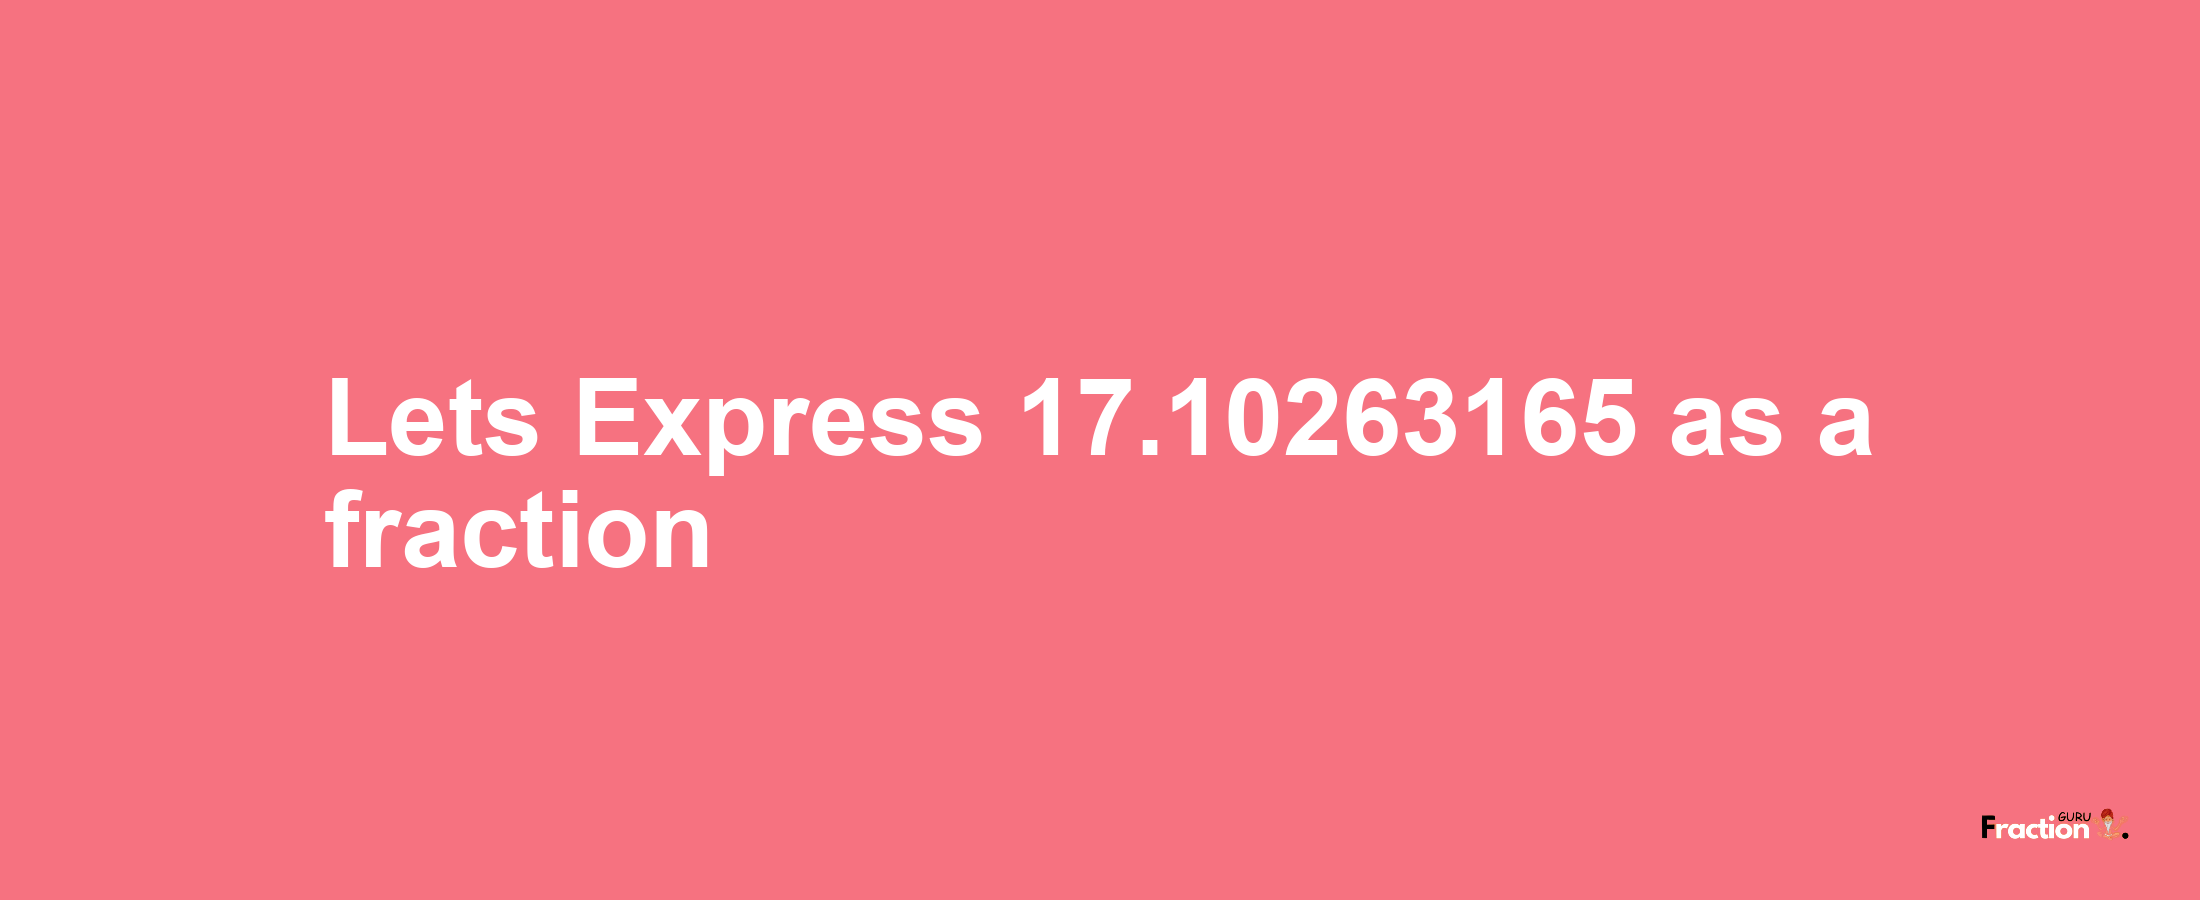 Lets Express 17.10263165 as afraction